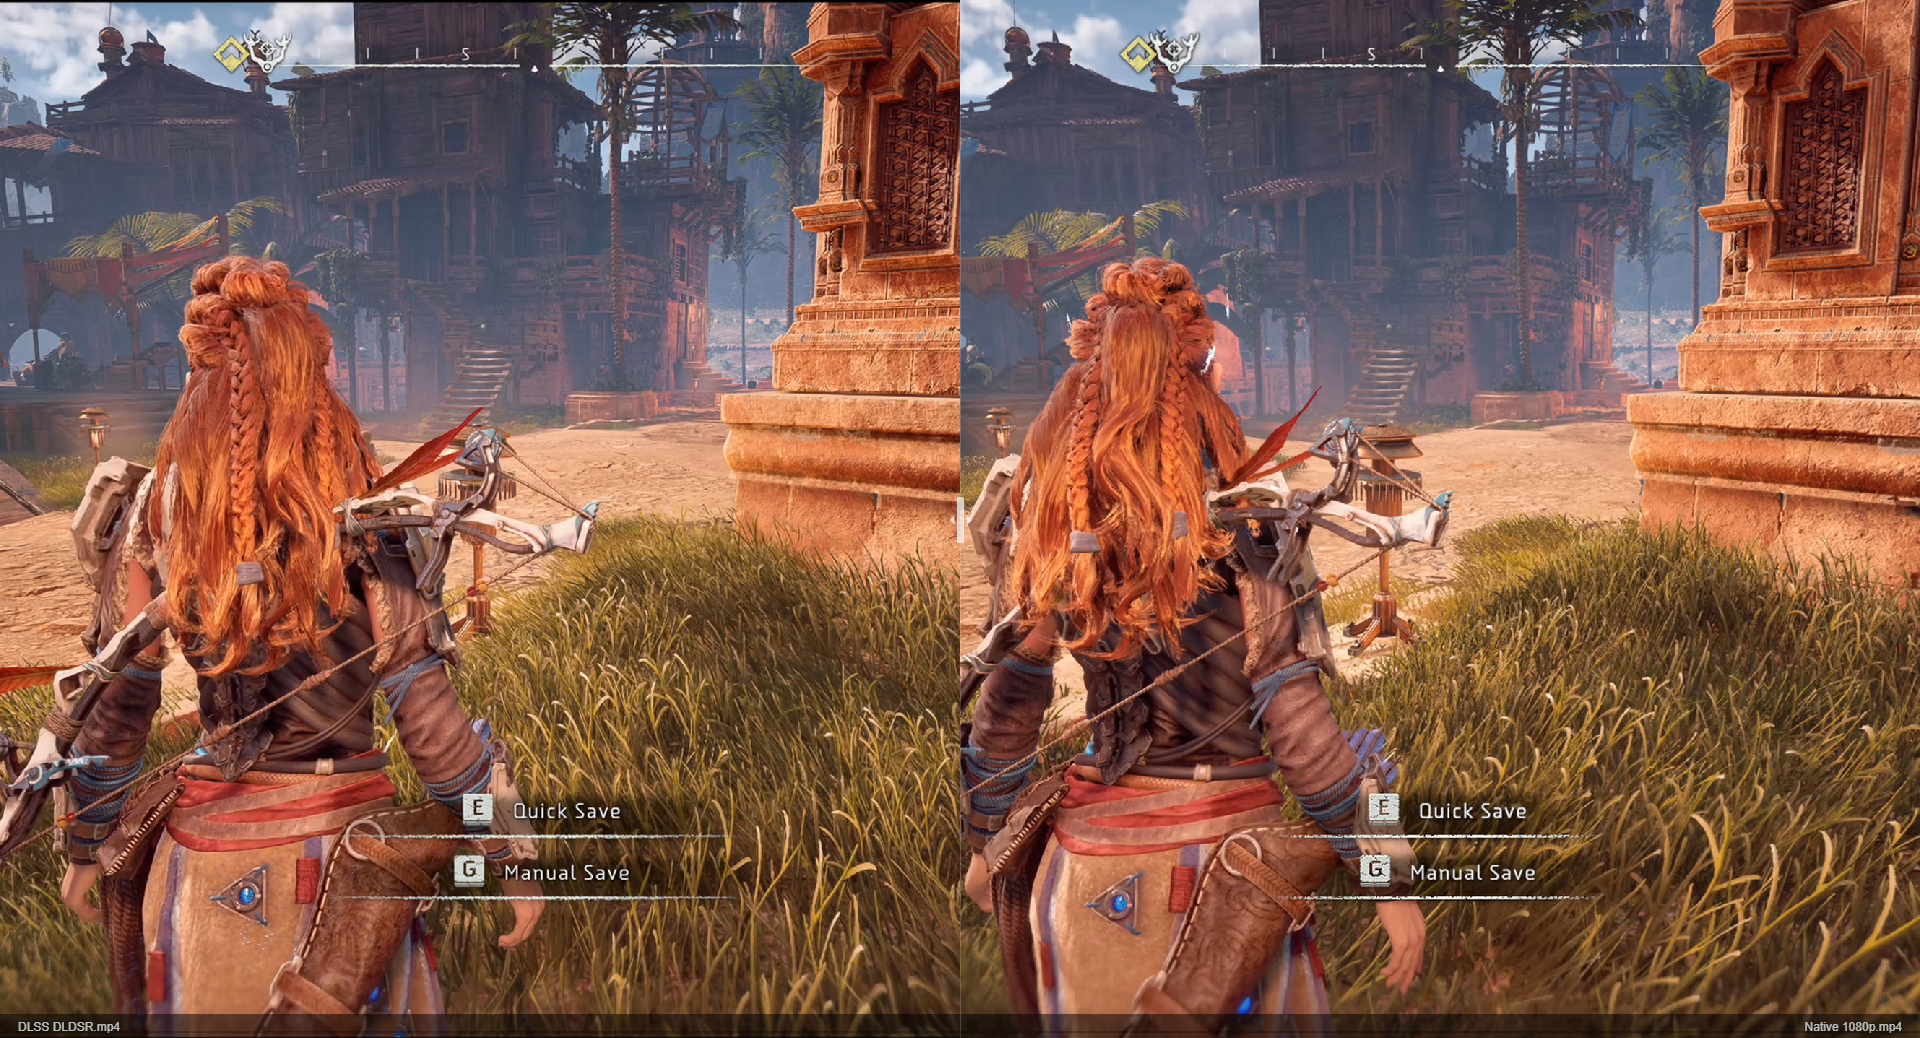 A Horizon Zero Dawn graphics comparison image showing DLSS/DLDSR on the left versus native rendering on the right.